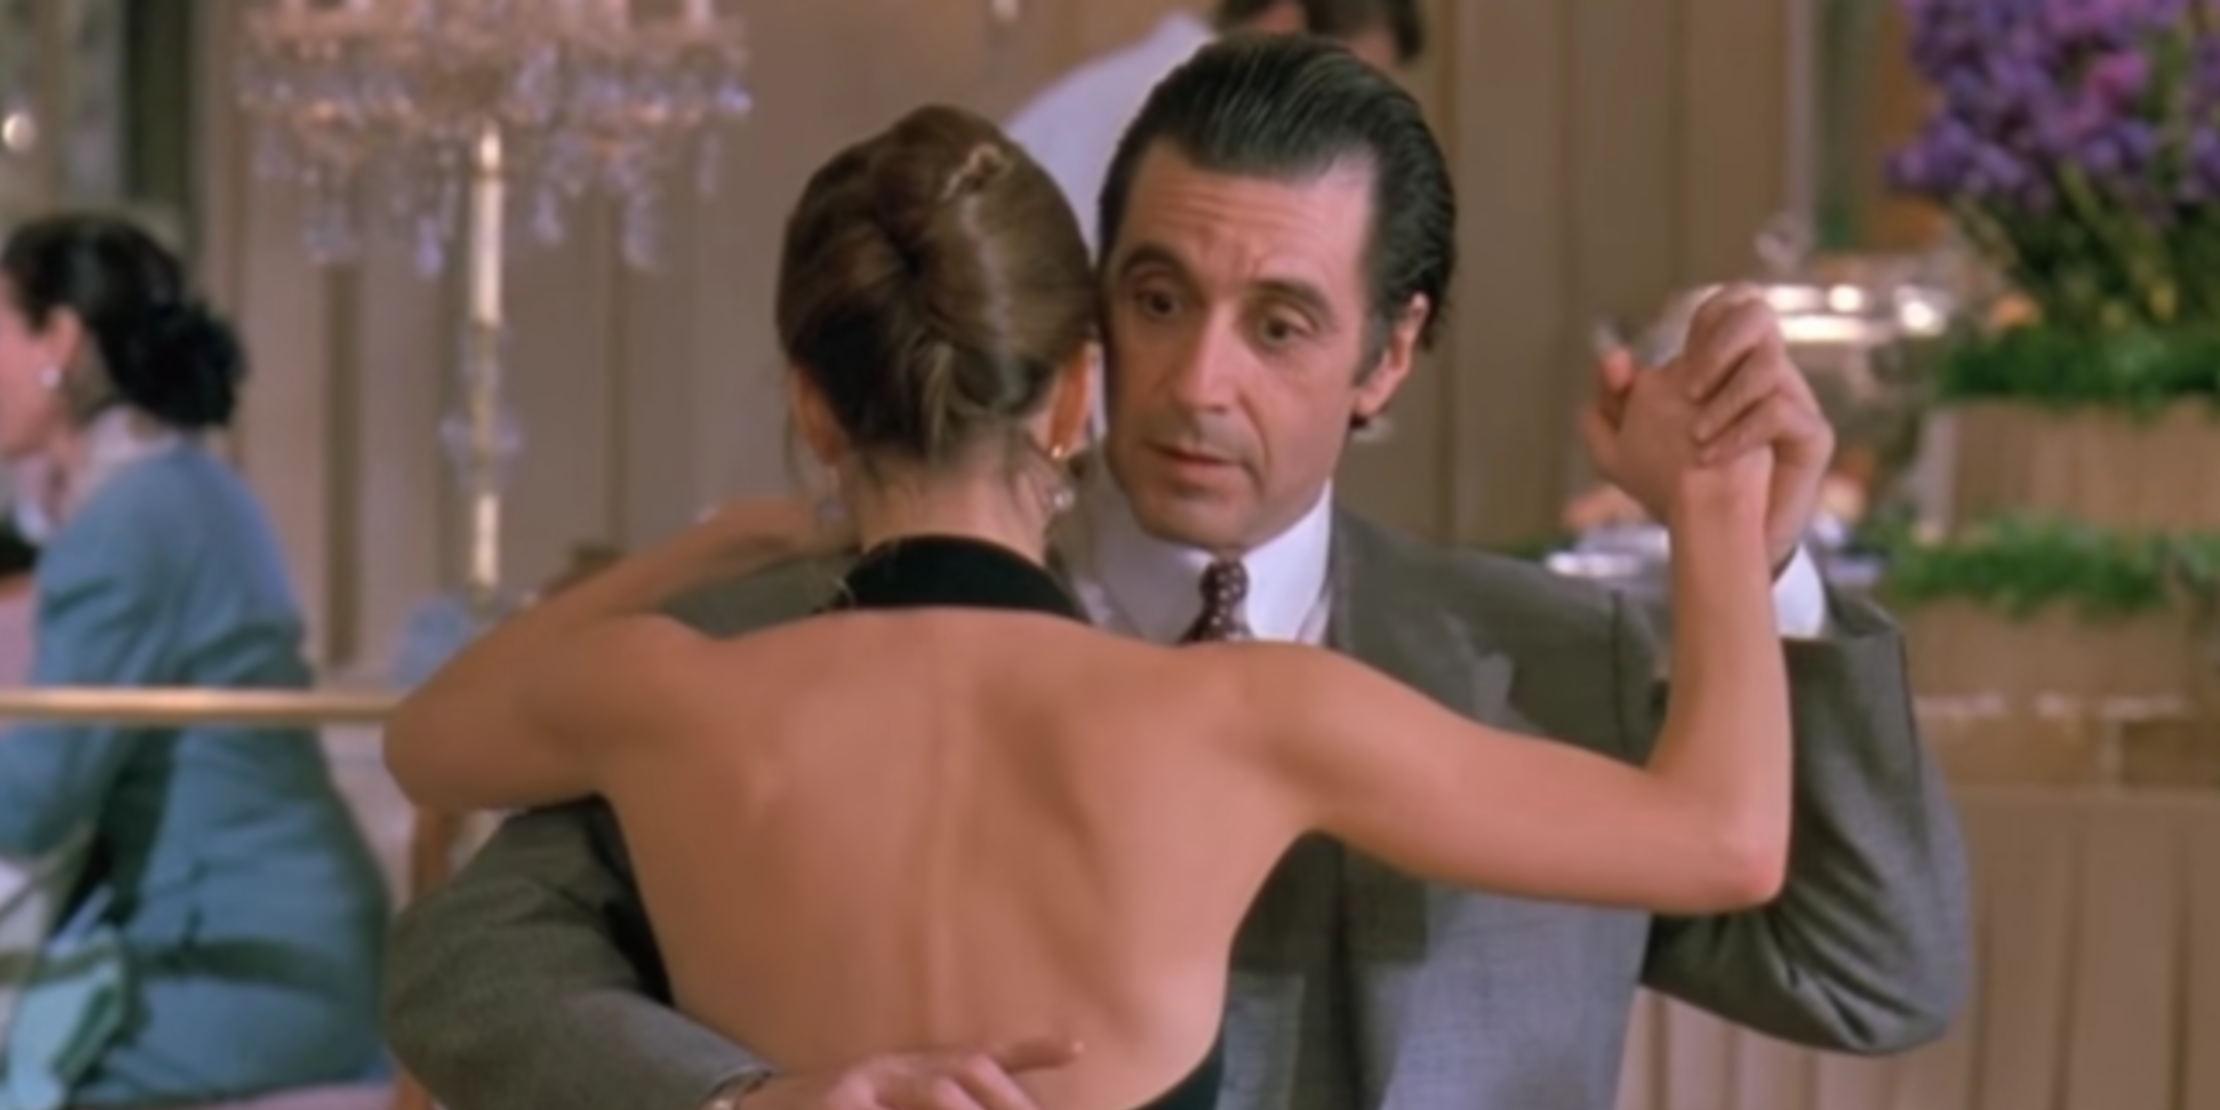 Al Pacino dances with a woman in Scent of a Woman